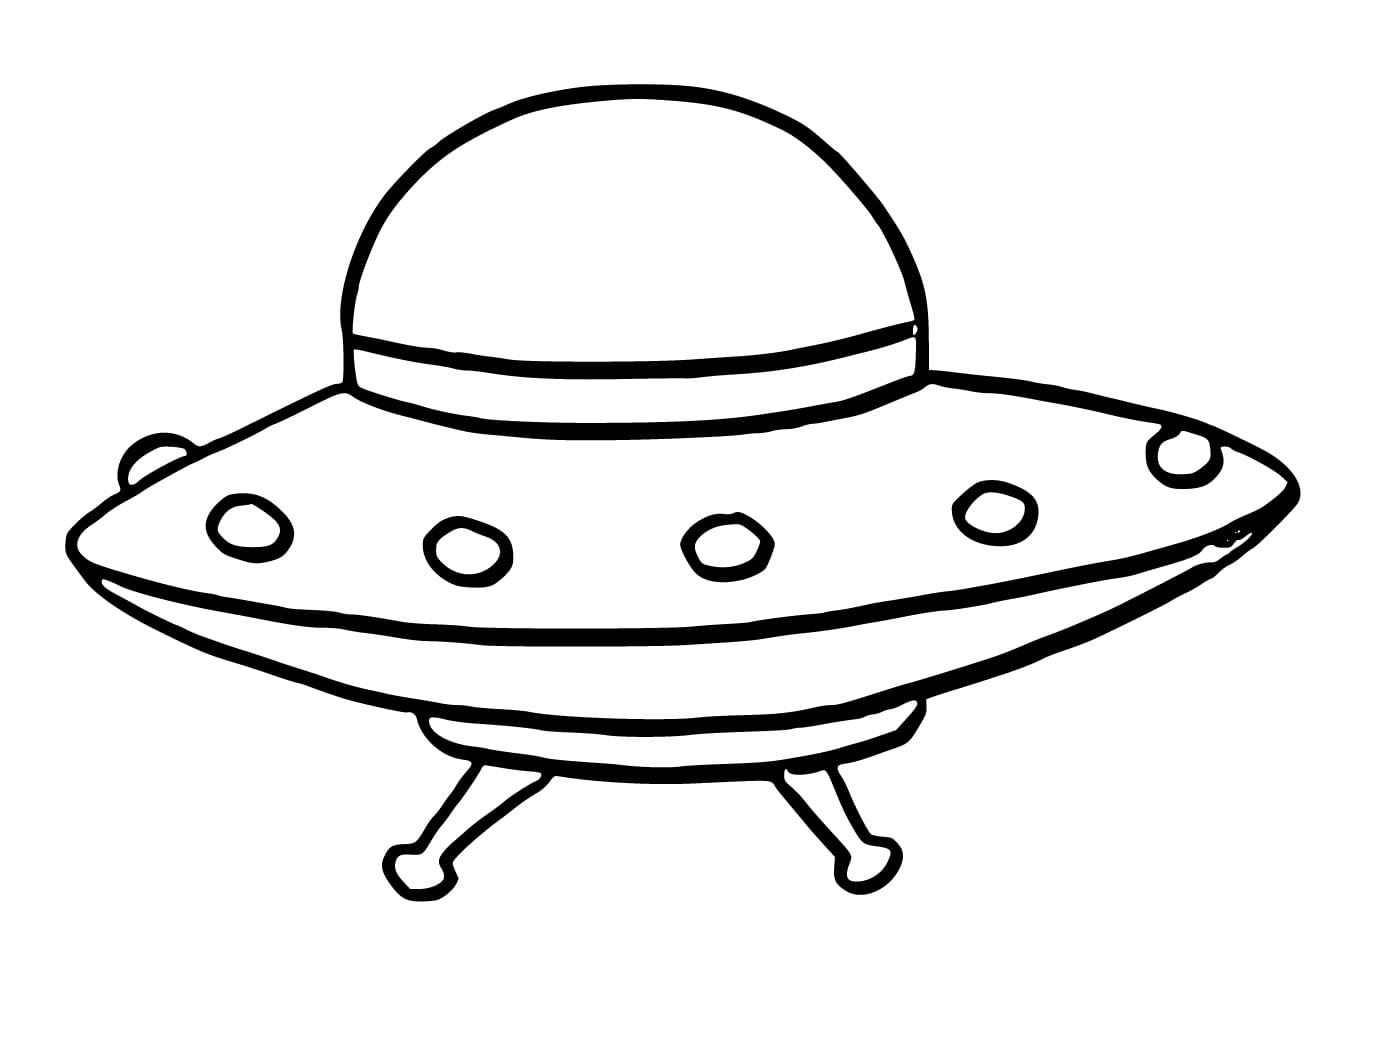 Cute UFO coloring page - Download, Print or Color Online for Free